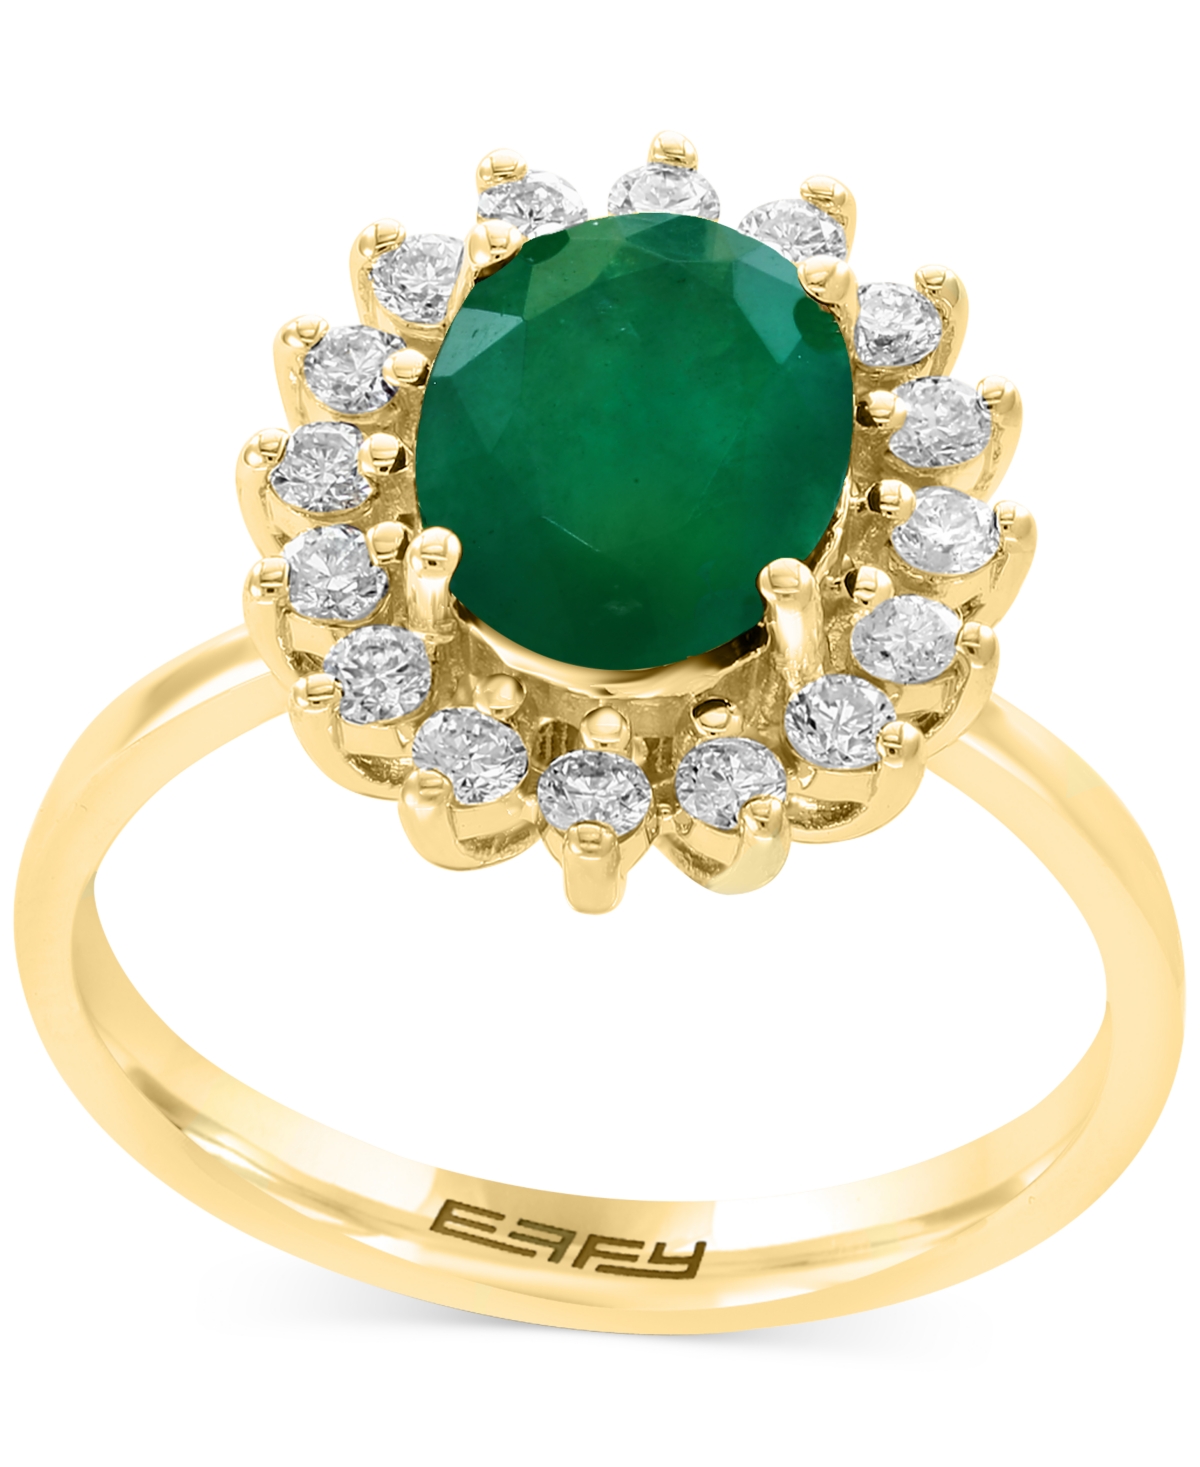 Effy Sapphire (1-7/8 ct. t.w.) & Diamond (3/8 ct. t.w.) Halo Ring in 14k Gold (Also available in Emerald) - Emerald